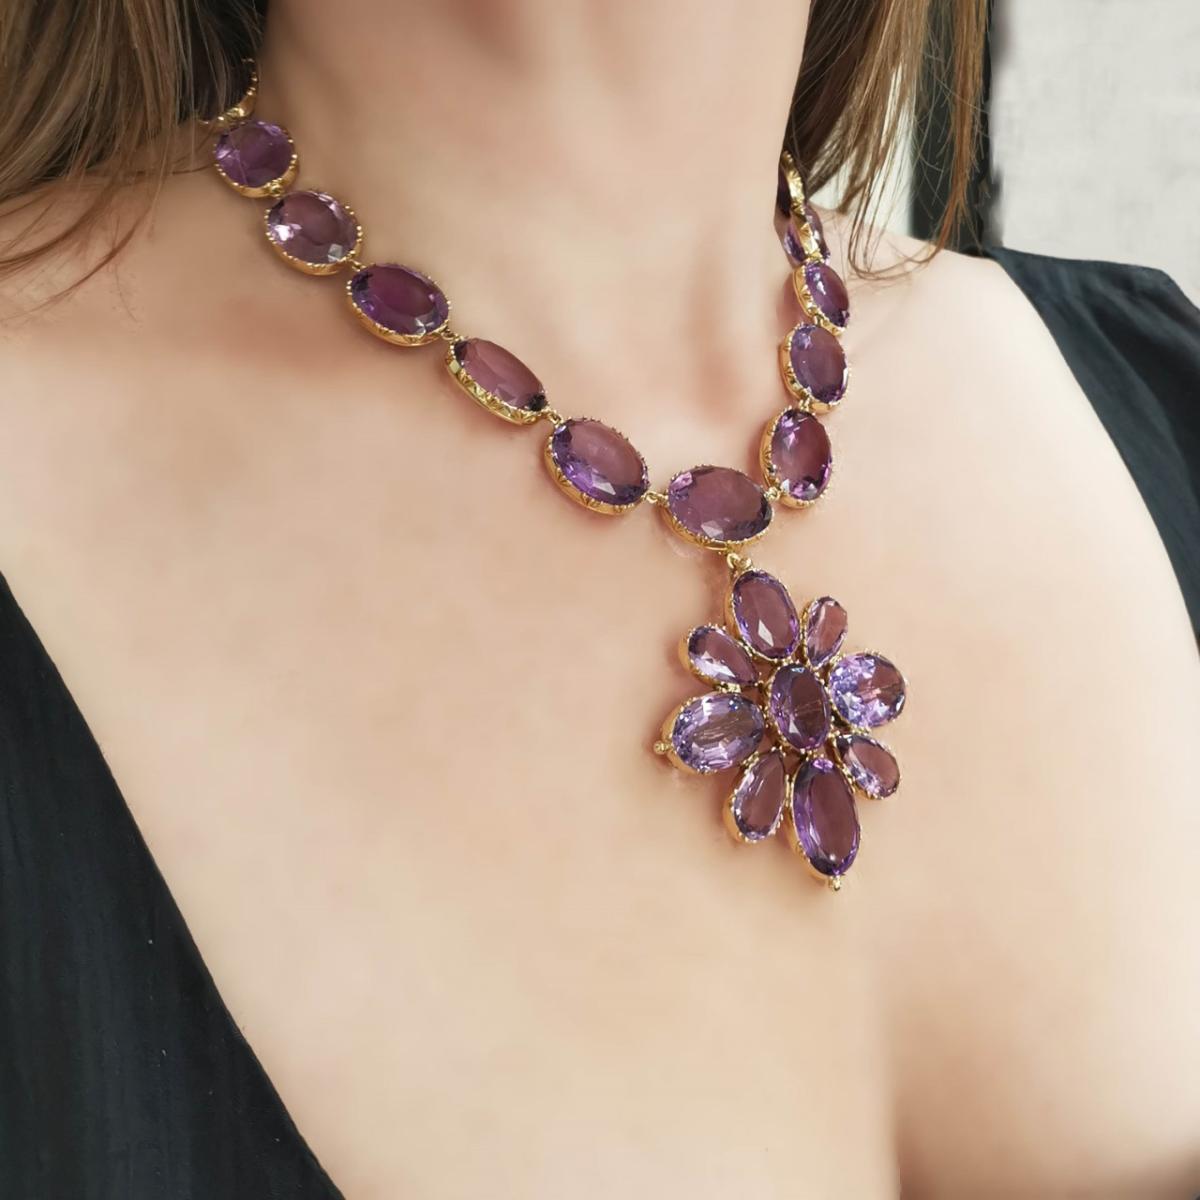 Amethyst necklace and pendant